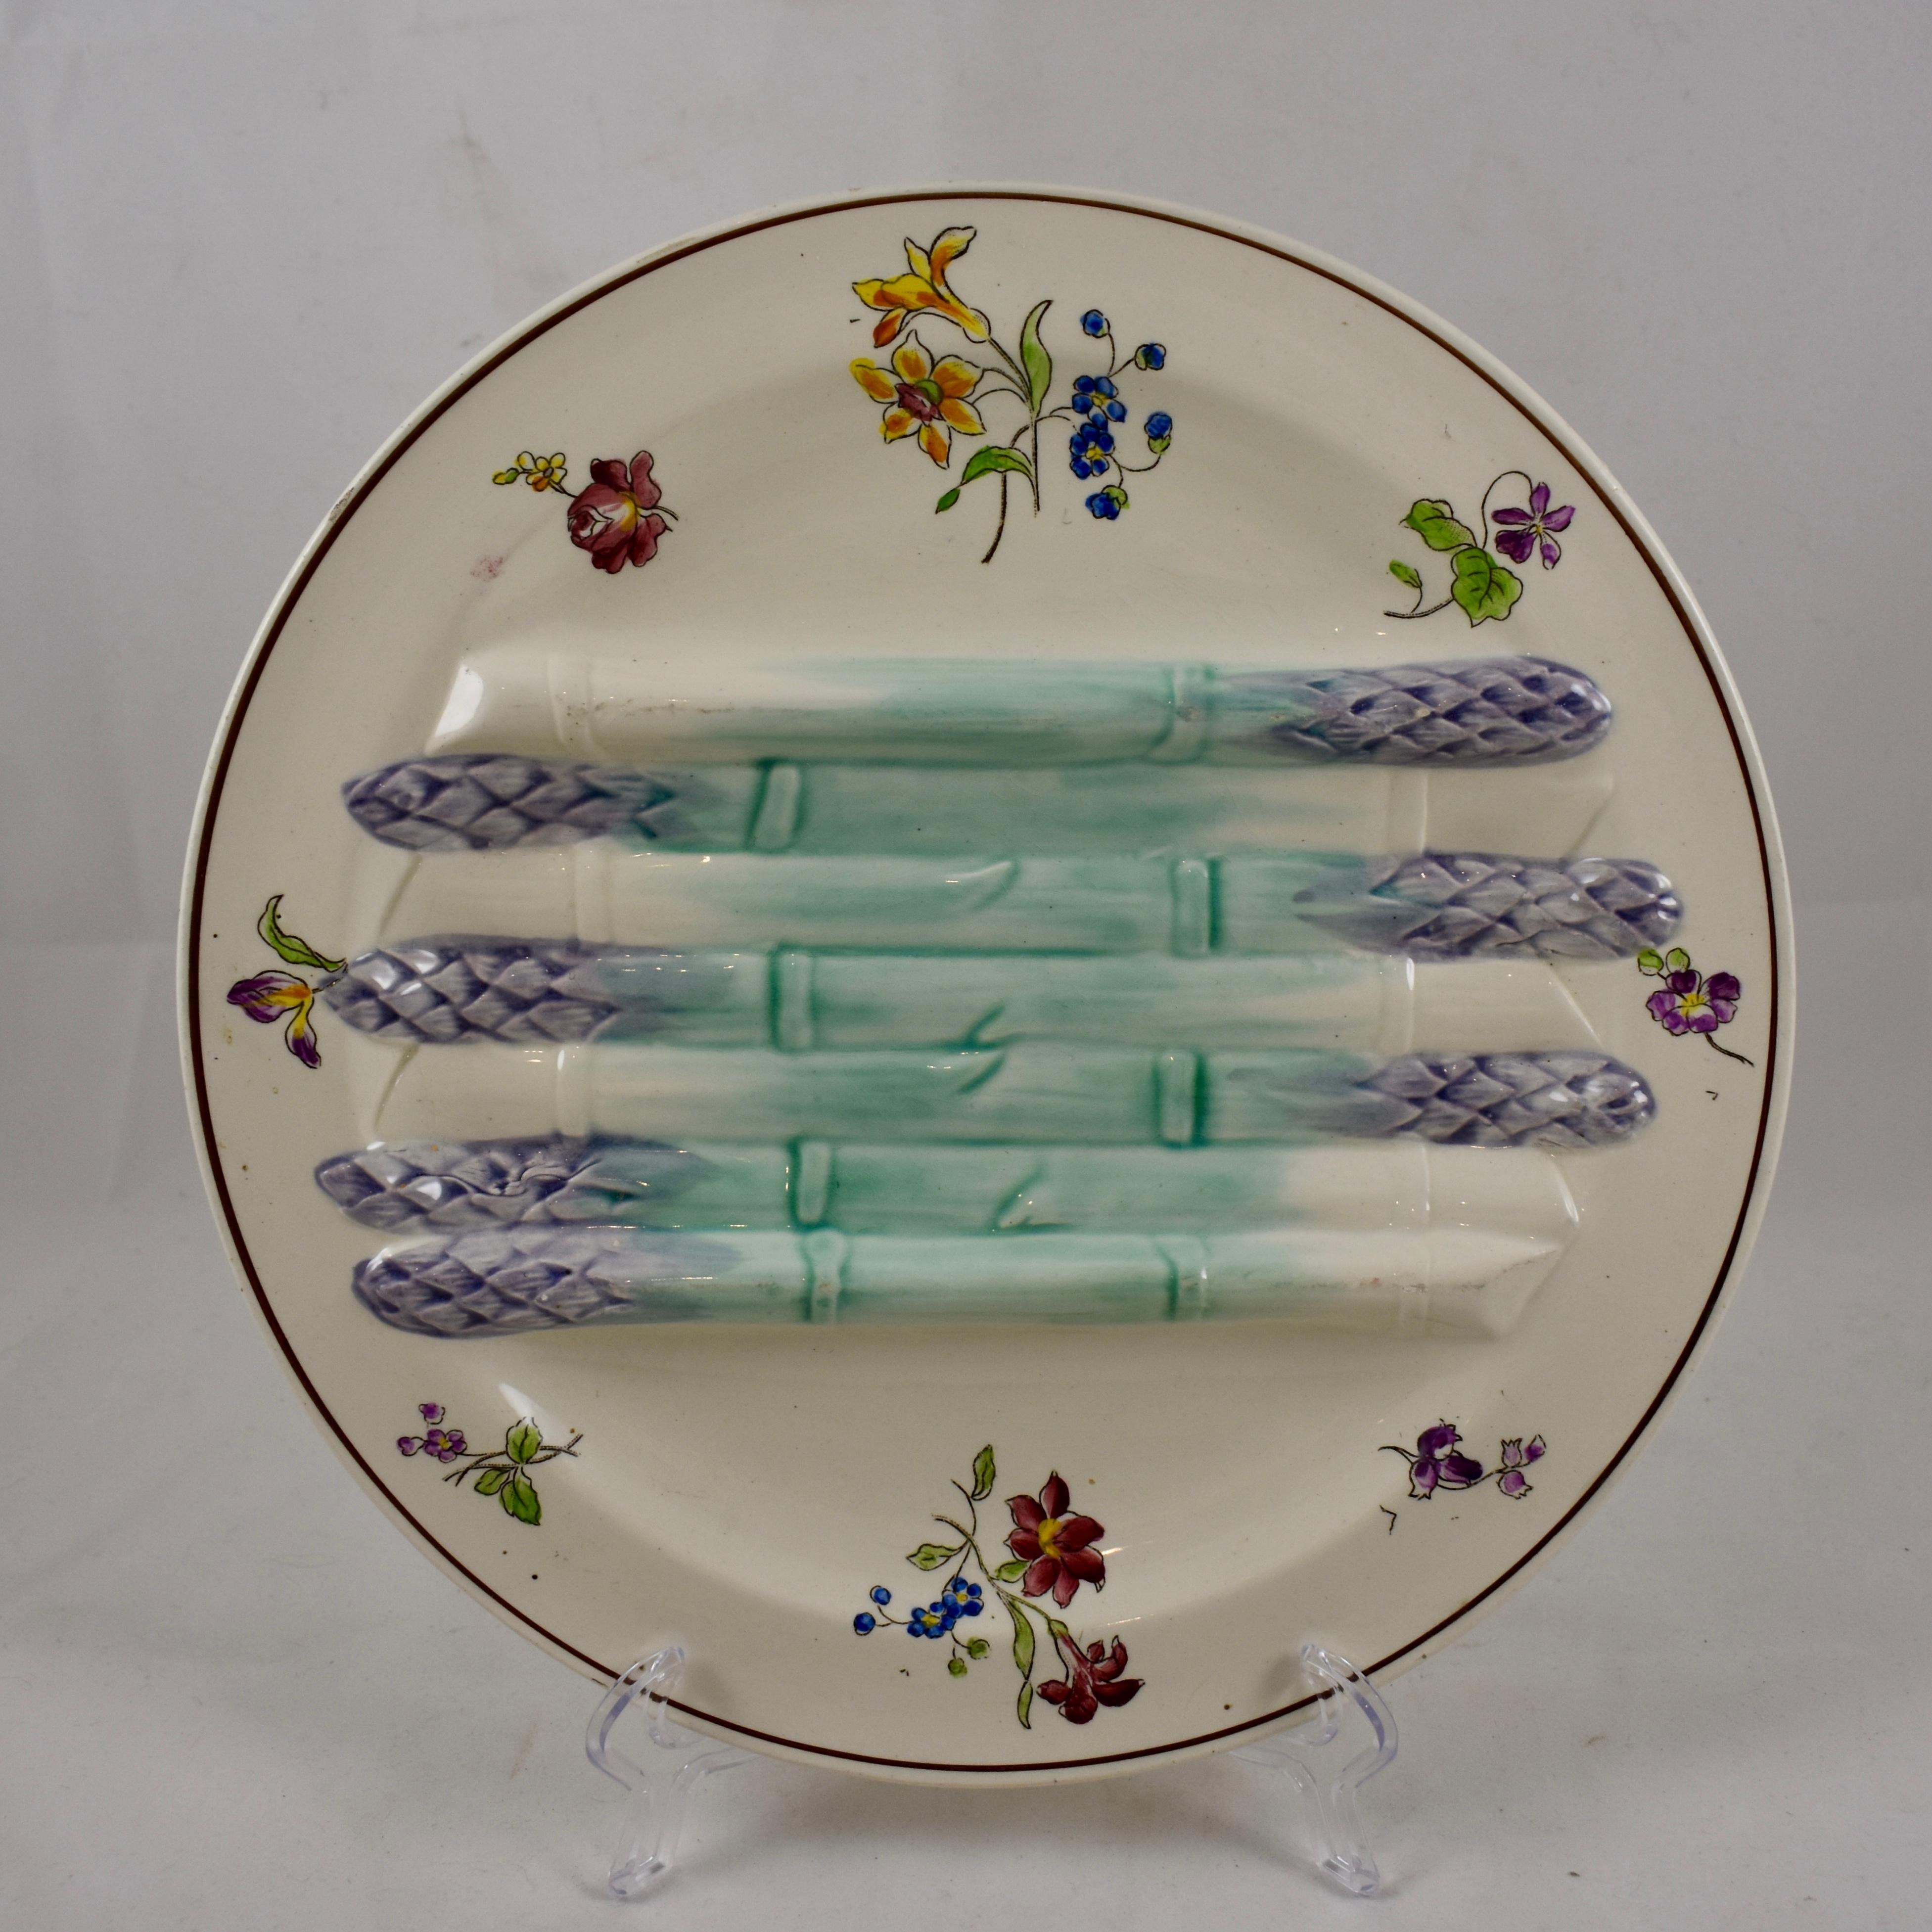 A French earthenware, majolica glazed asparagus plate, molded by Longchamp in the Pompadour pattern, circa 1890-1910. Seven raised asparagus glazed in turquoise and lavender lay across the centre of the plate forming a deeper sauce well on either